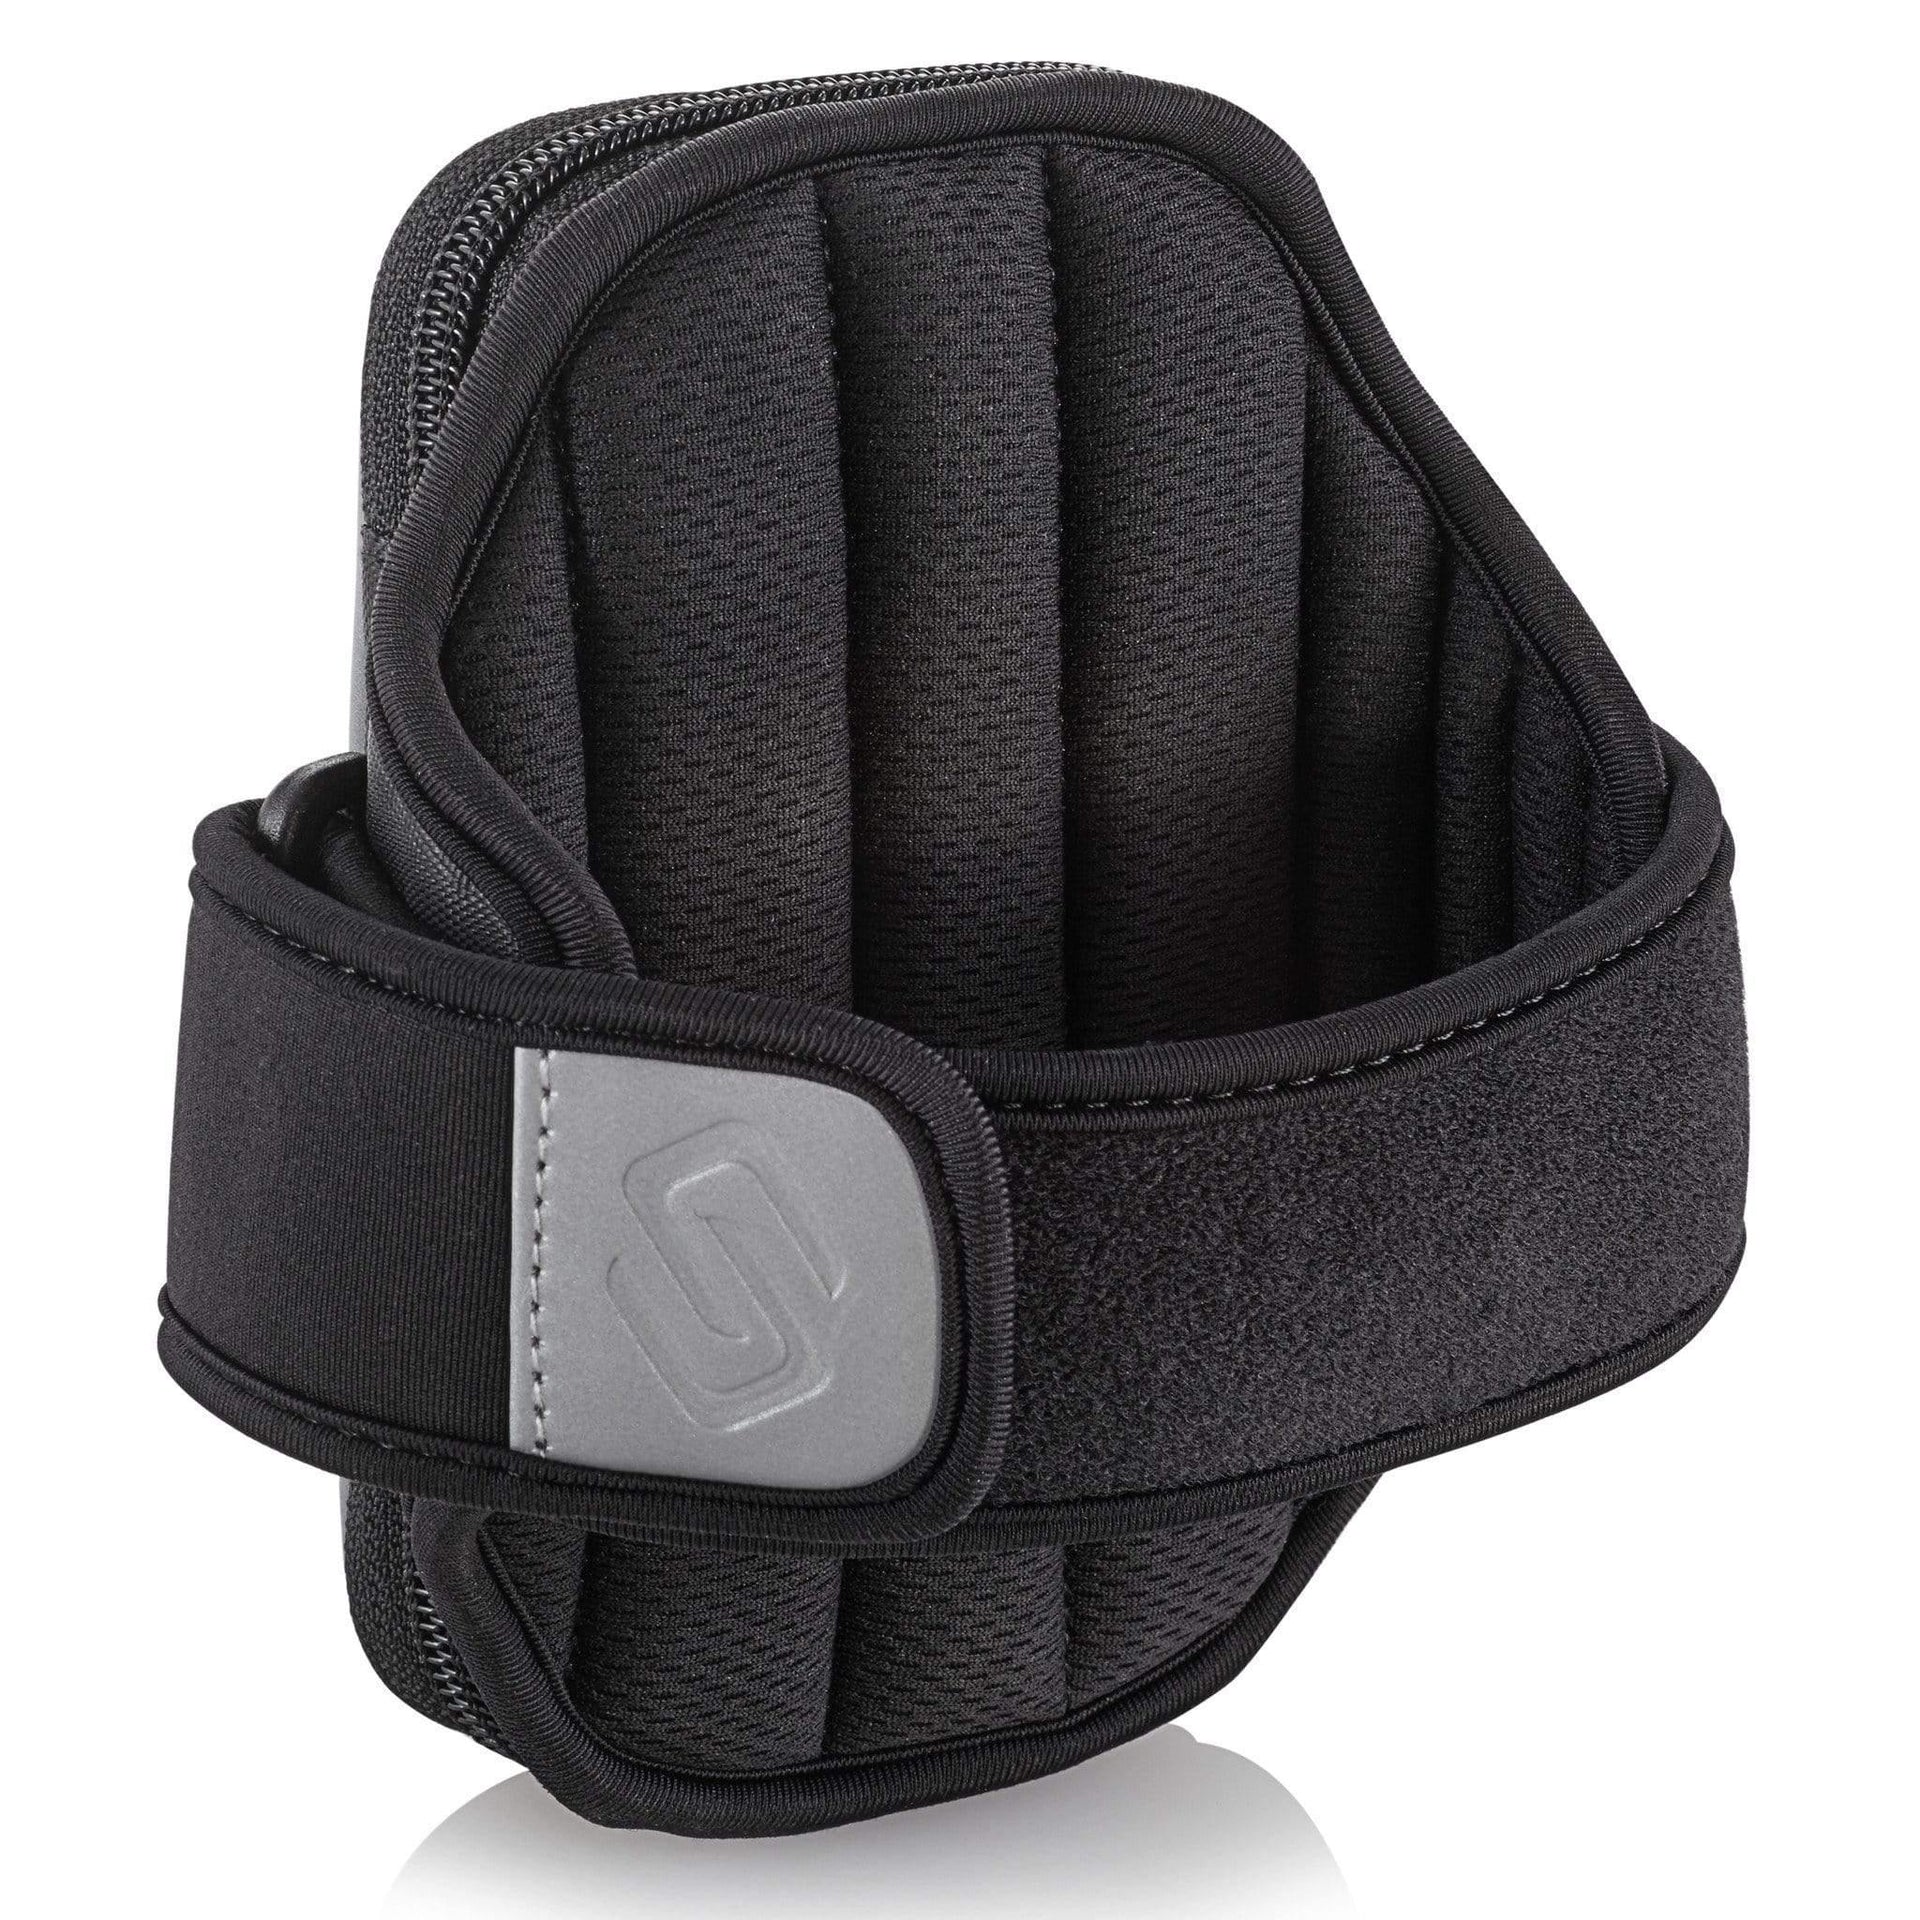 Sporteer Entropy E8 Modular running Armband is the most comfortable armband for exercising